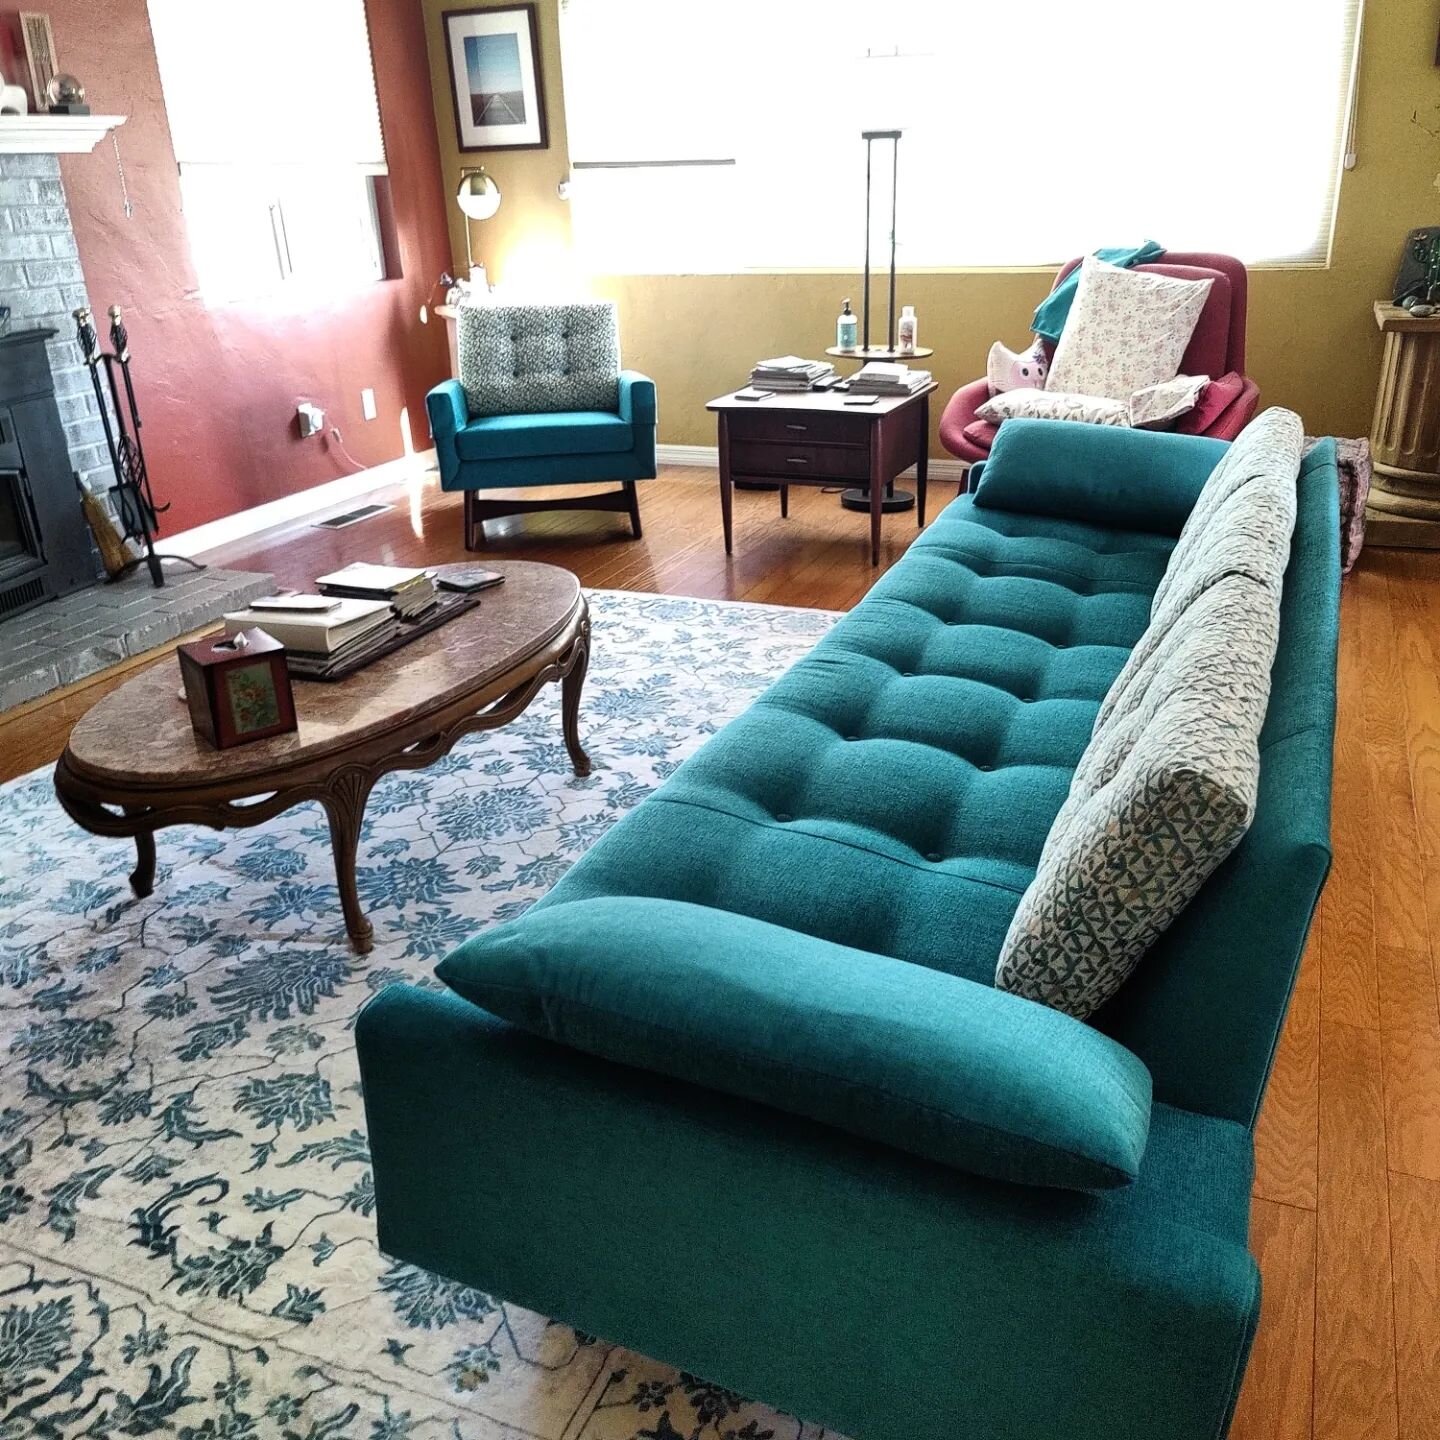 Fantastic vintage sofa and matching chair

#upholstery #familybusiness #furnitureupholstery #sandiego #elcajon #smallbusiness #vintagefurniture #vintage #vintagechair #vintagesofa